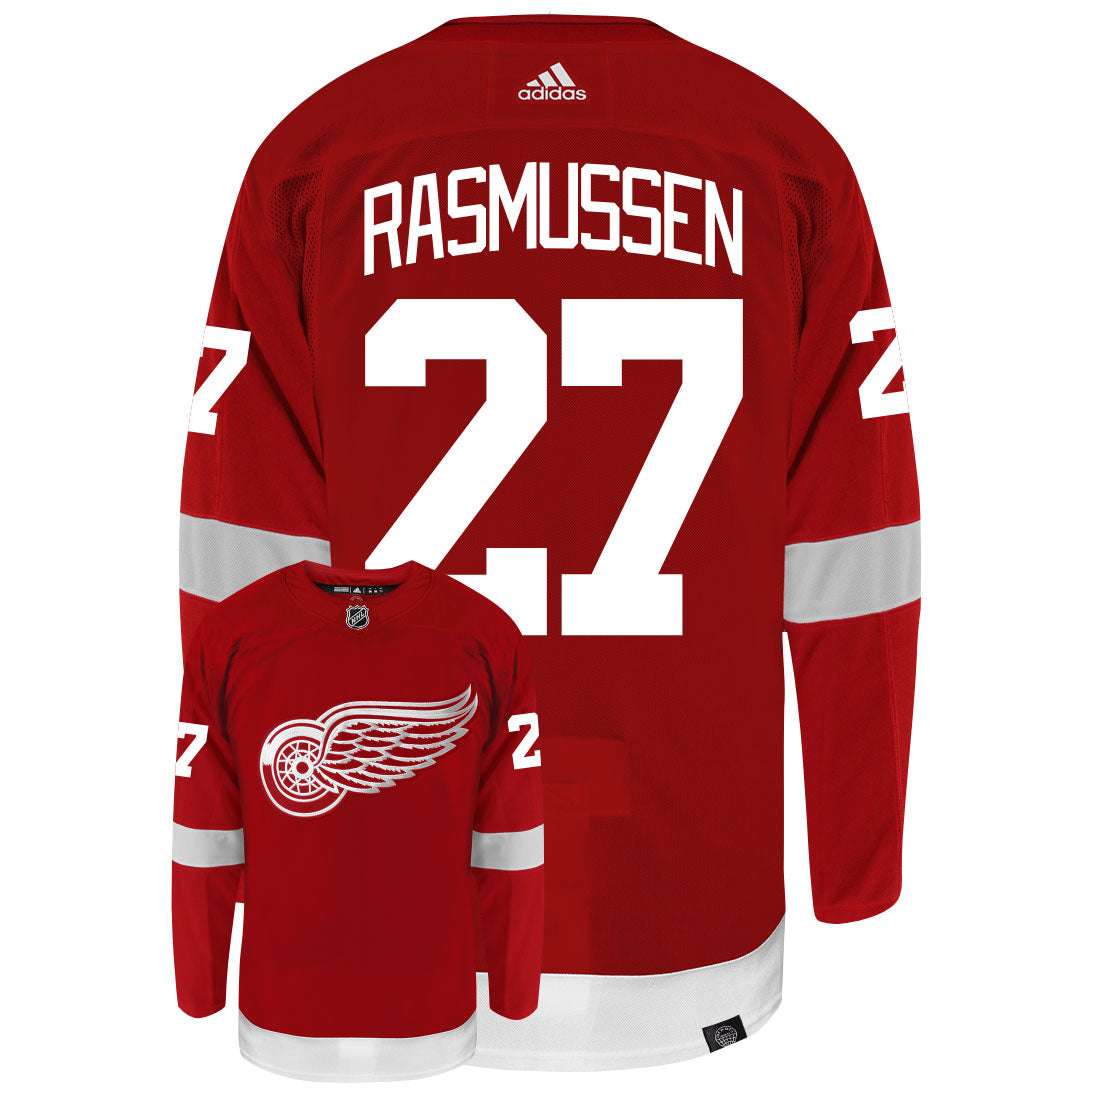 Michael Rasmussen Detroit Red Wings Adidas Primegreen Authentic NHL Hockey Jersey